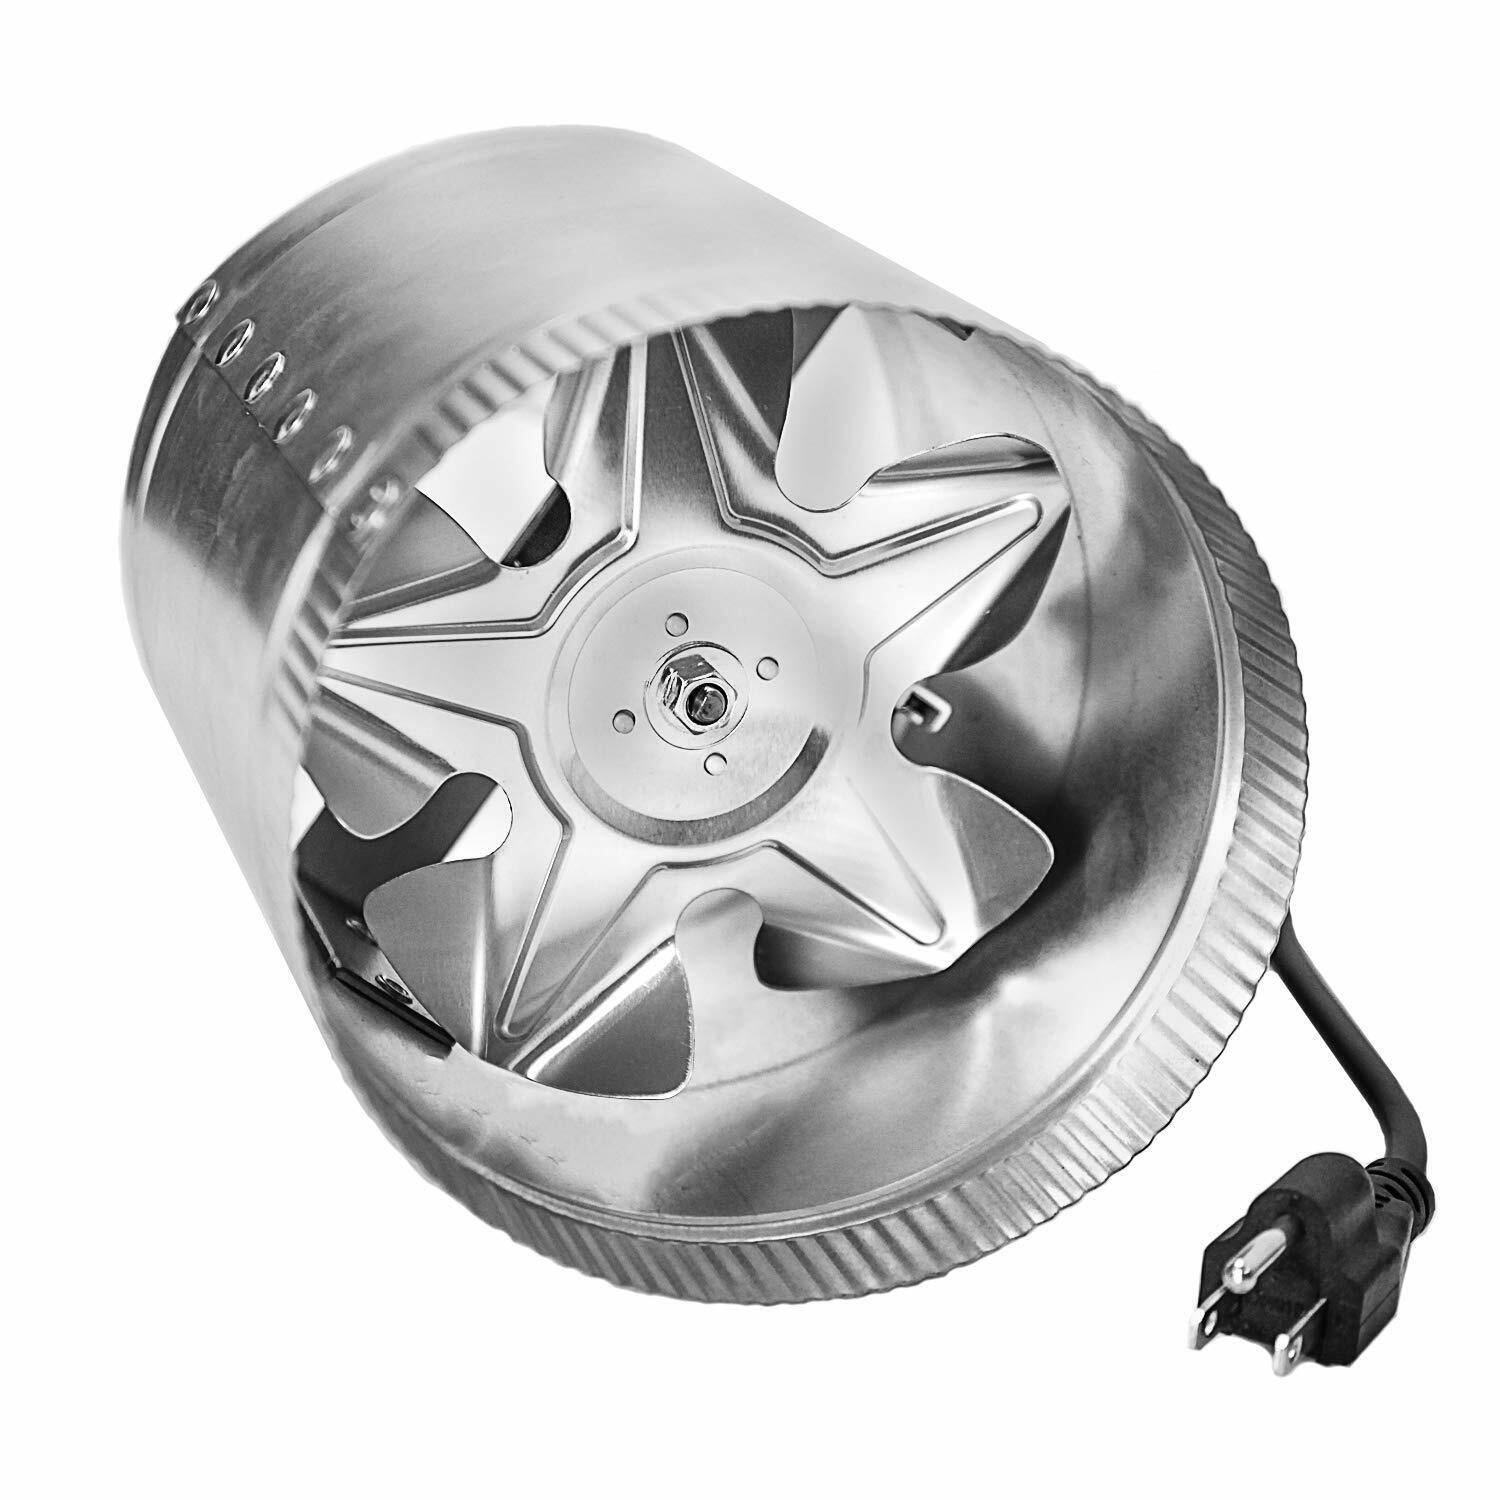 iPower ETL Certified 6 Inch Booster Fan Inline Exhaust Blower for Ducting Vent